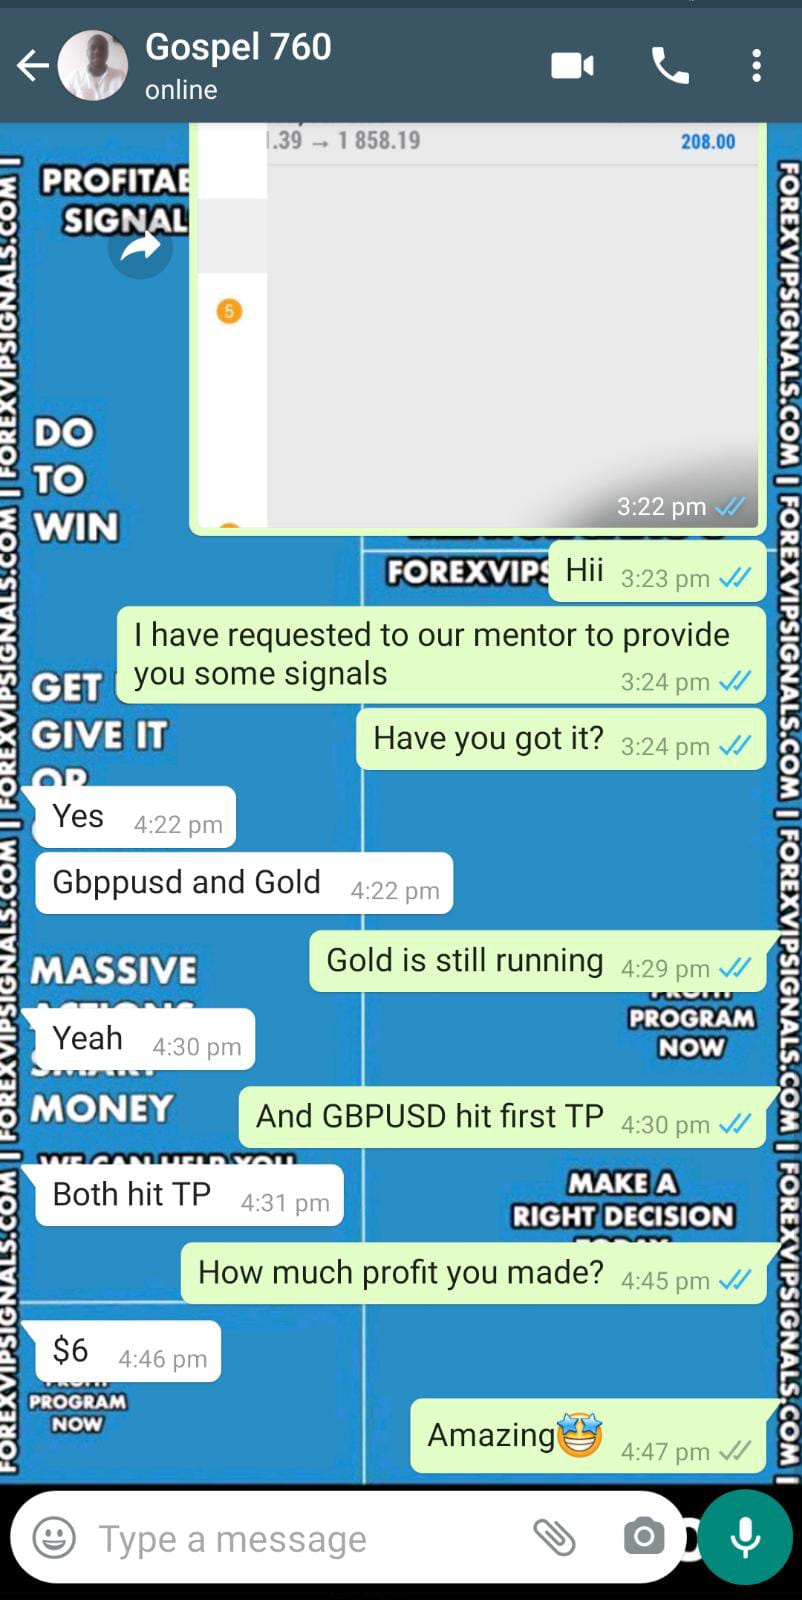 best trading signals with forex vip signals